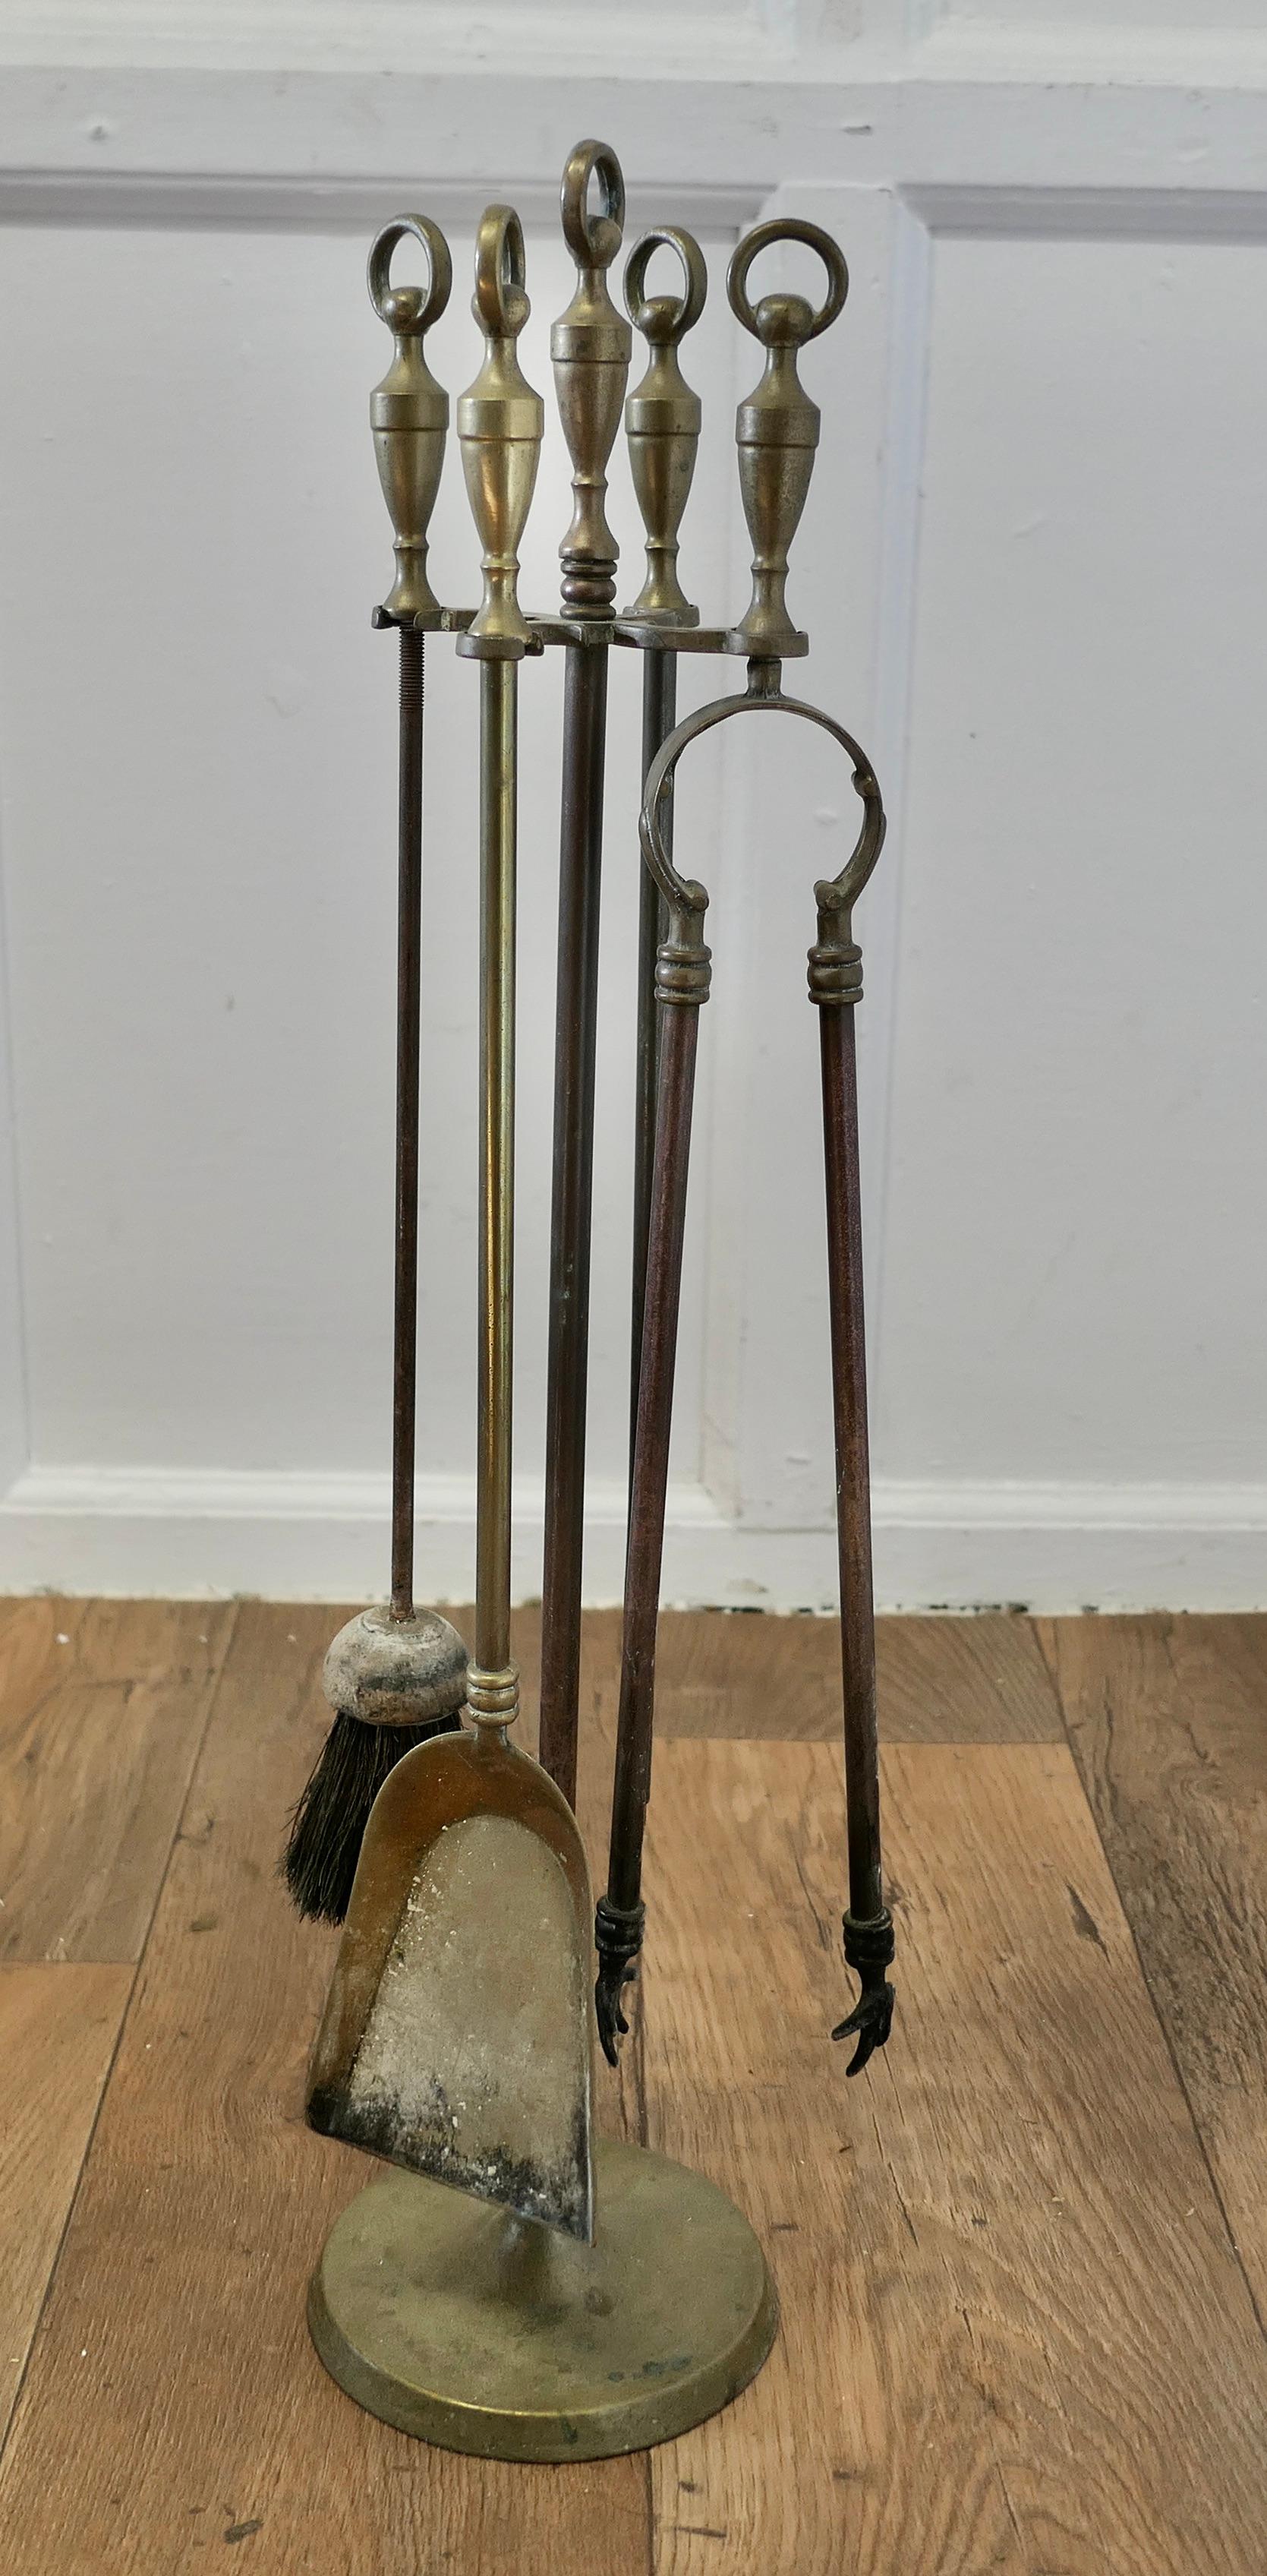 Attractive Brass Fireside Companion Set, Fireside Tools

This is a long handled set on its own stand, shovel, tongs, brush and poker  
The stand 28” tall and 6” in diameter
SC163